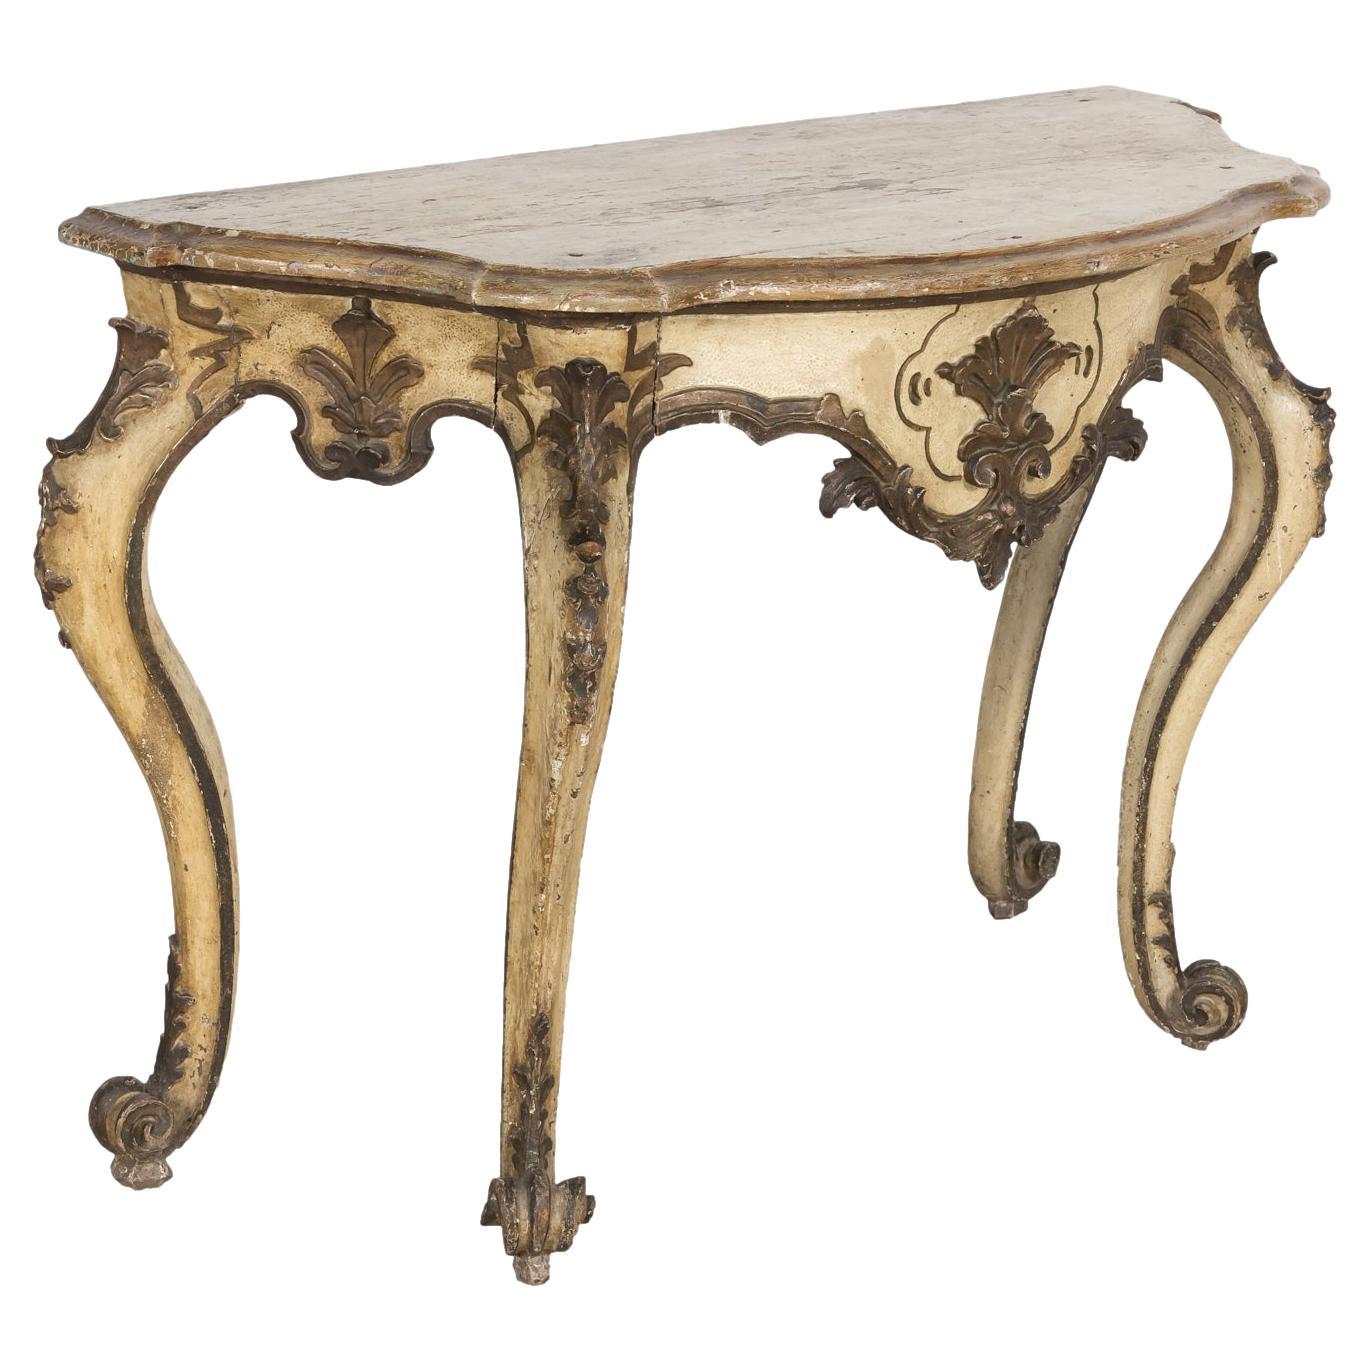 19th Century Italian Rococo Style Painted and Parcel Gilt Console Table For Sale